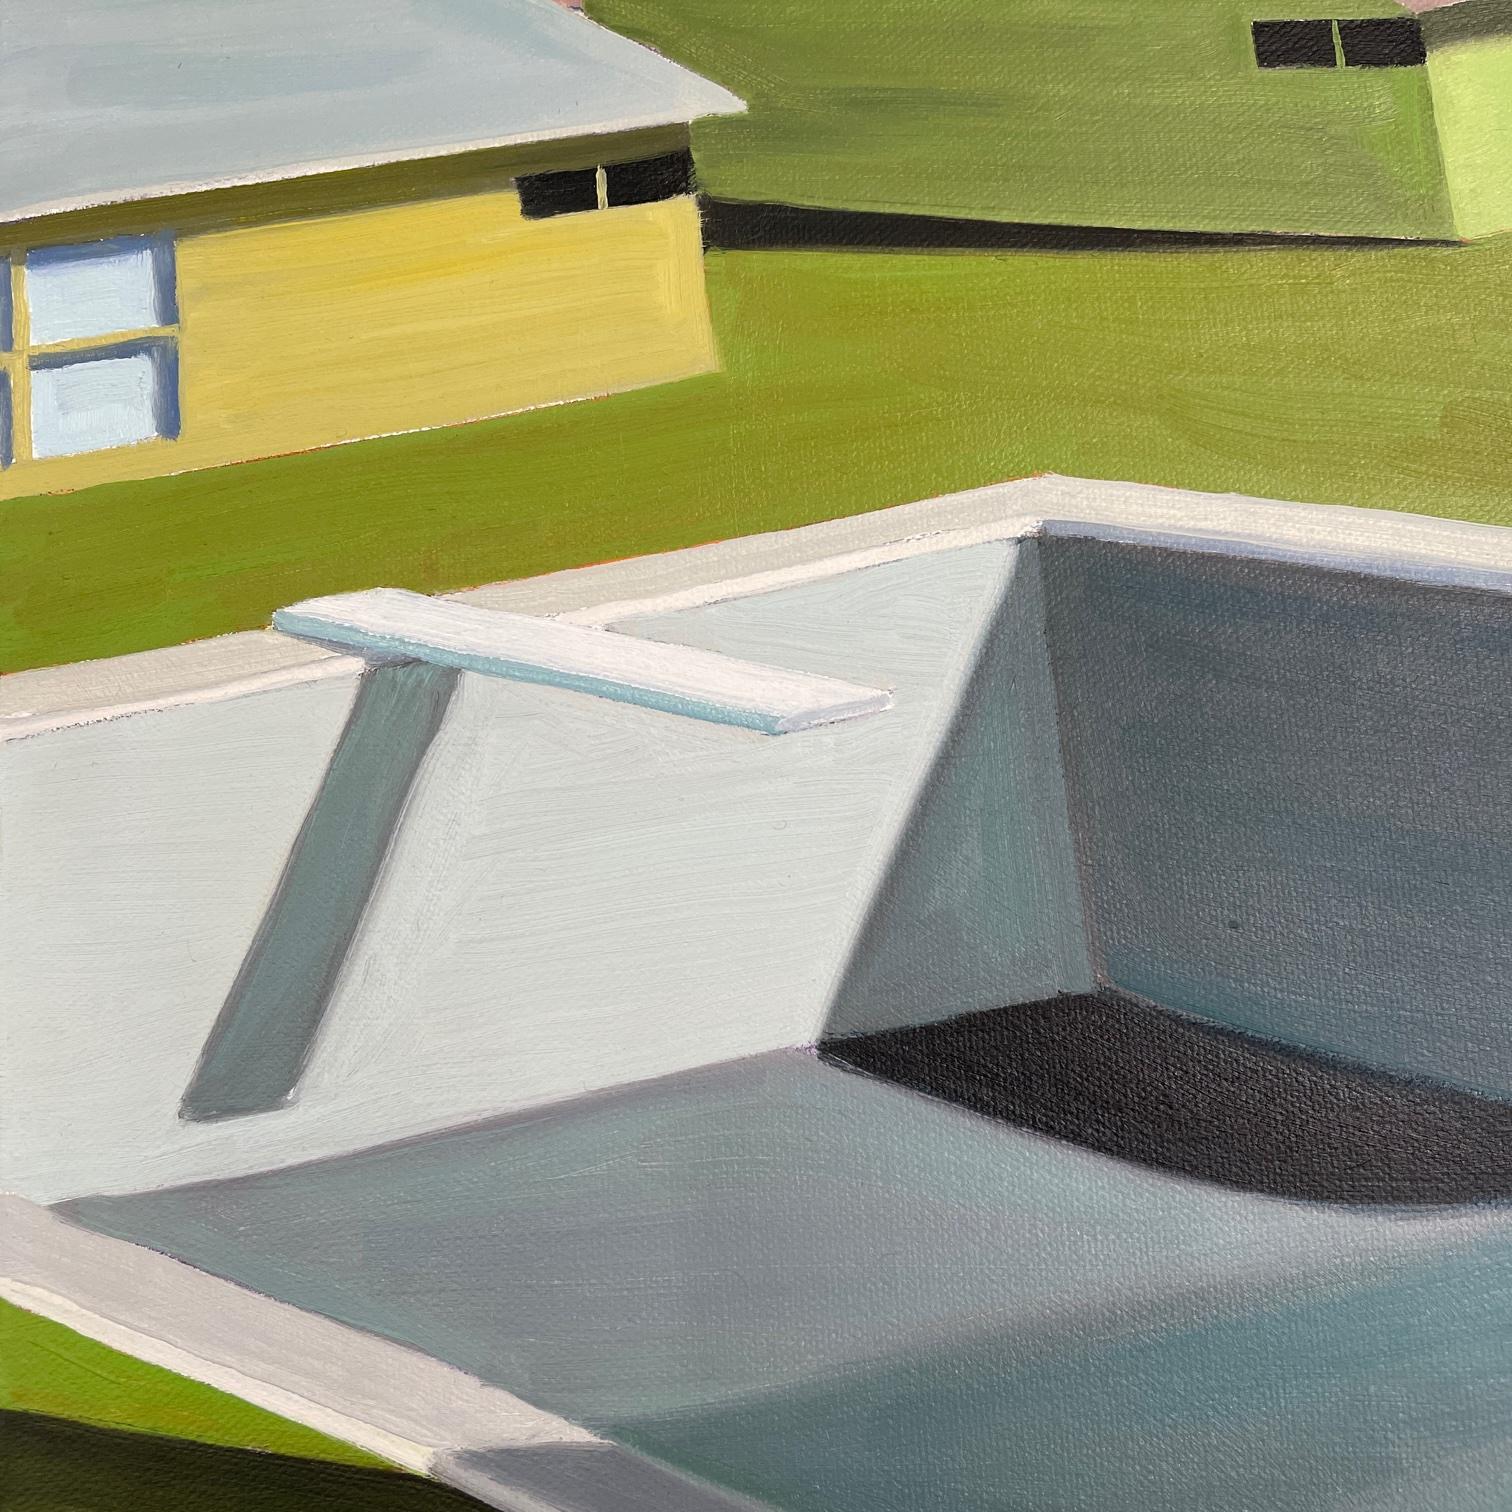 Mid-century houses with garden pools. Title - Day # 7 - American Modern Painting by R. Michael Wommack